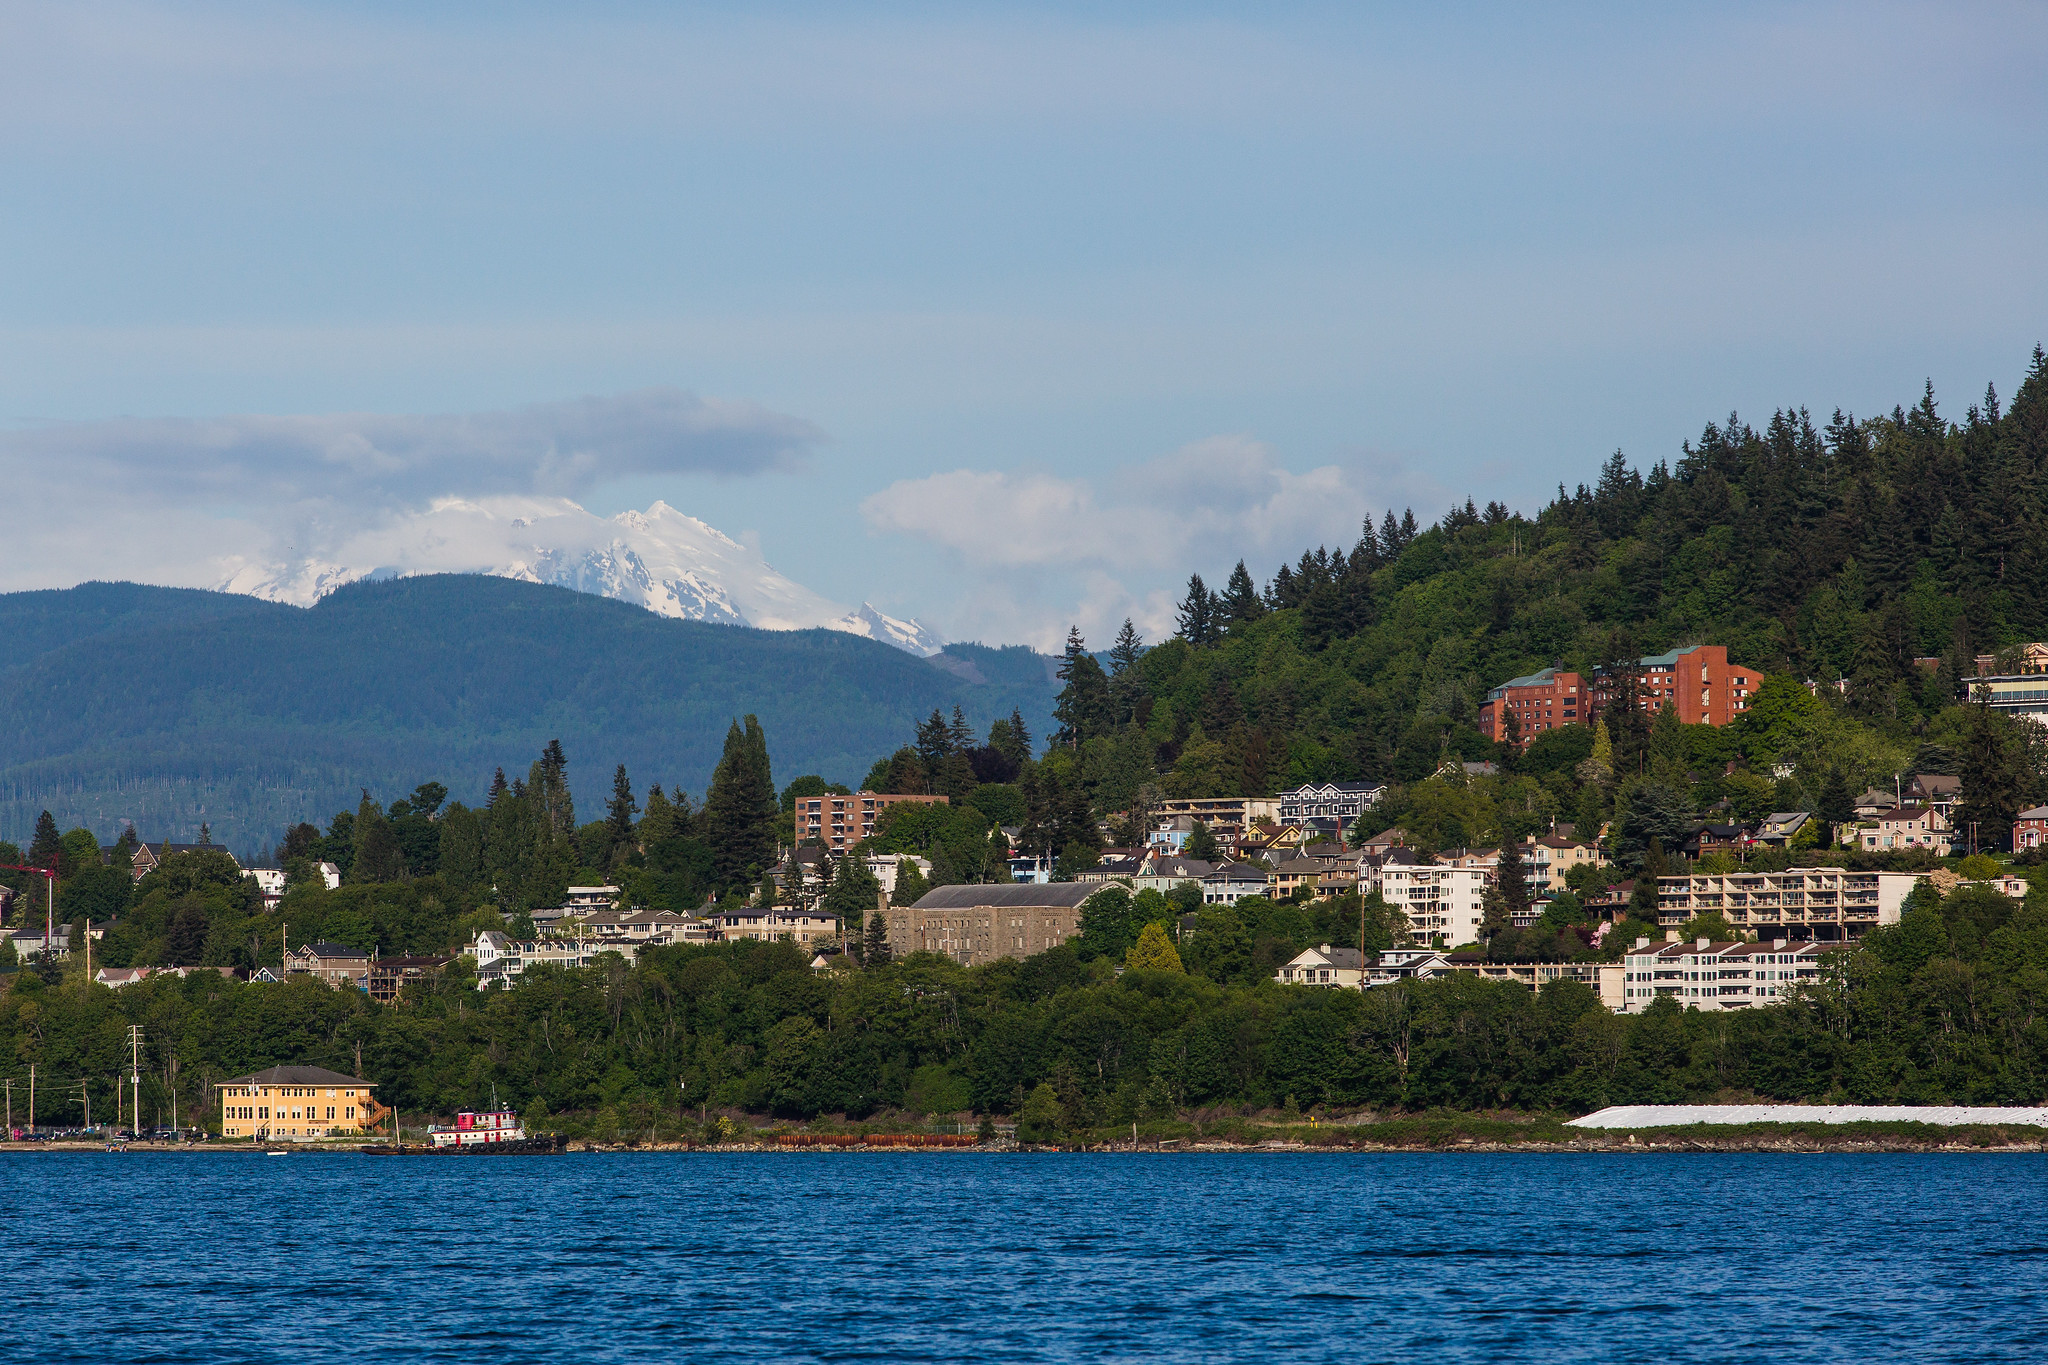 View of Bellingham and Western Washington University from the bay with Mount Baker behind some clouds in the distance 